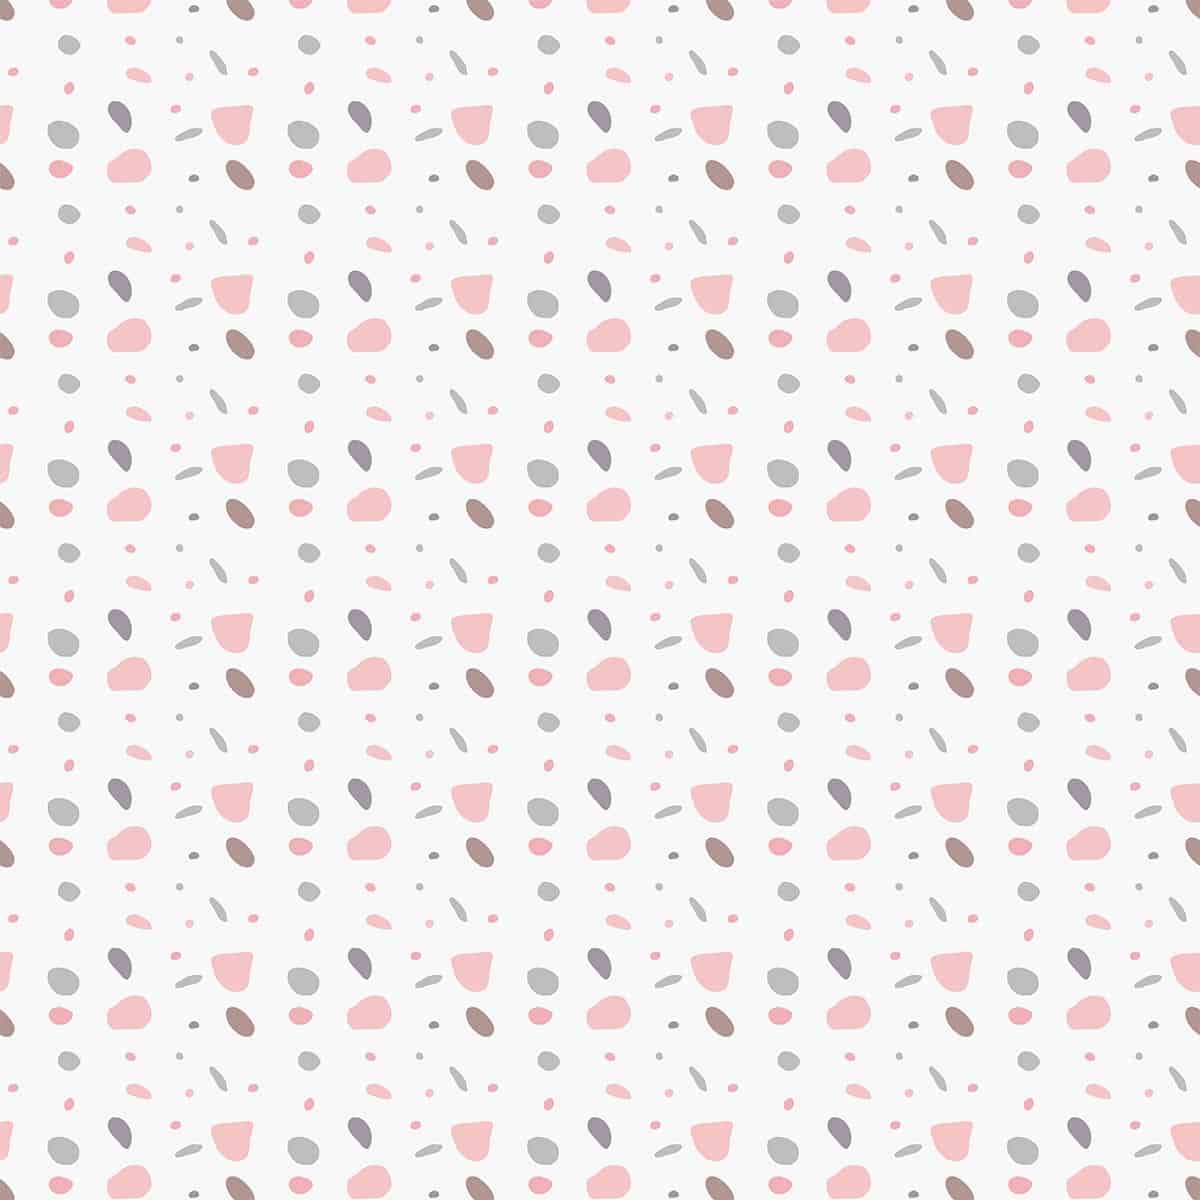 Abstract Playful Patterns, Kids Wallpaper for Rooms, Off White